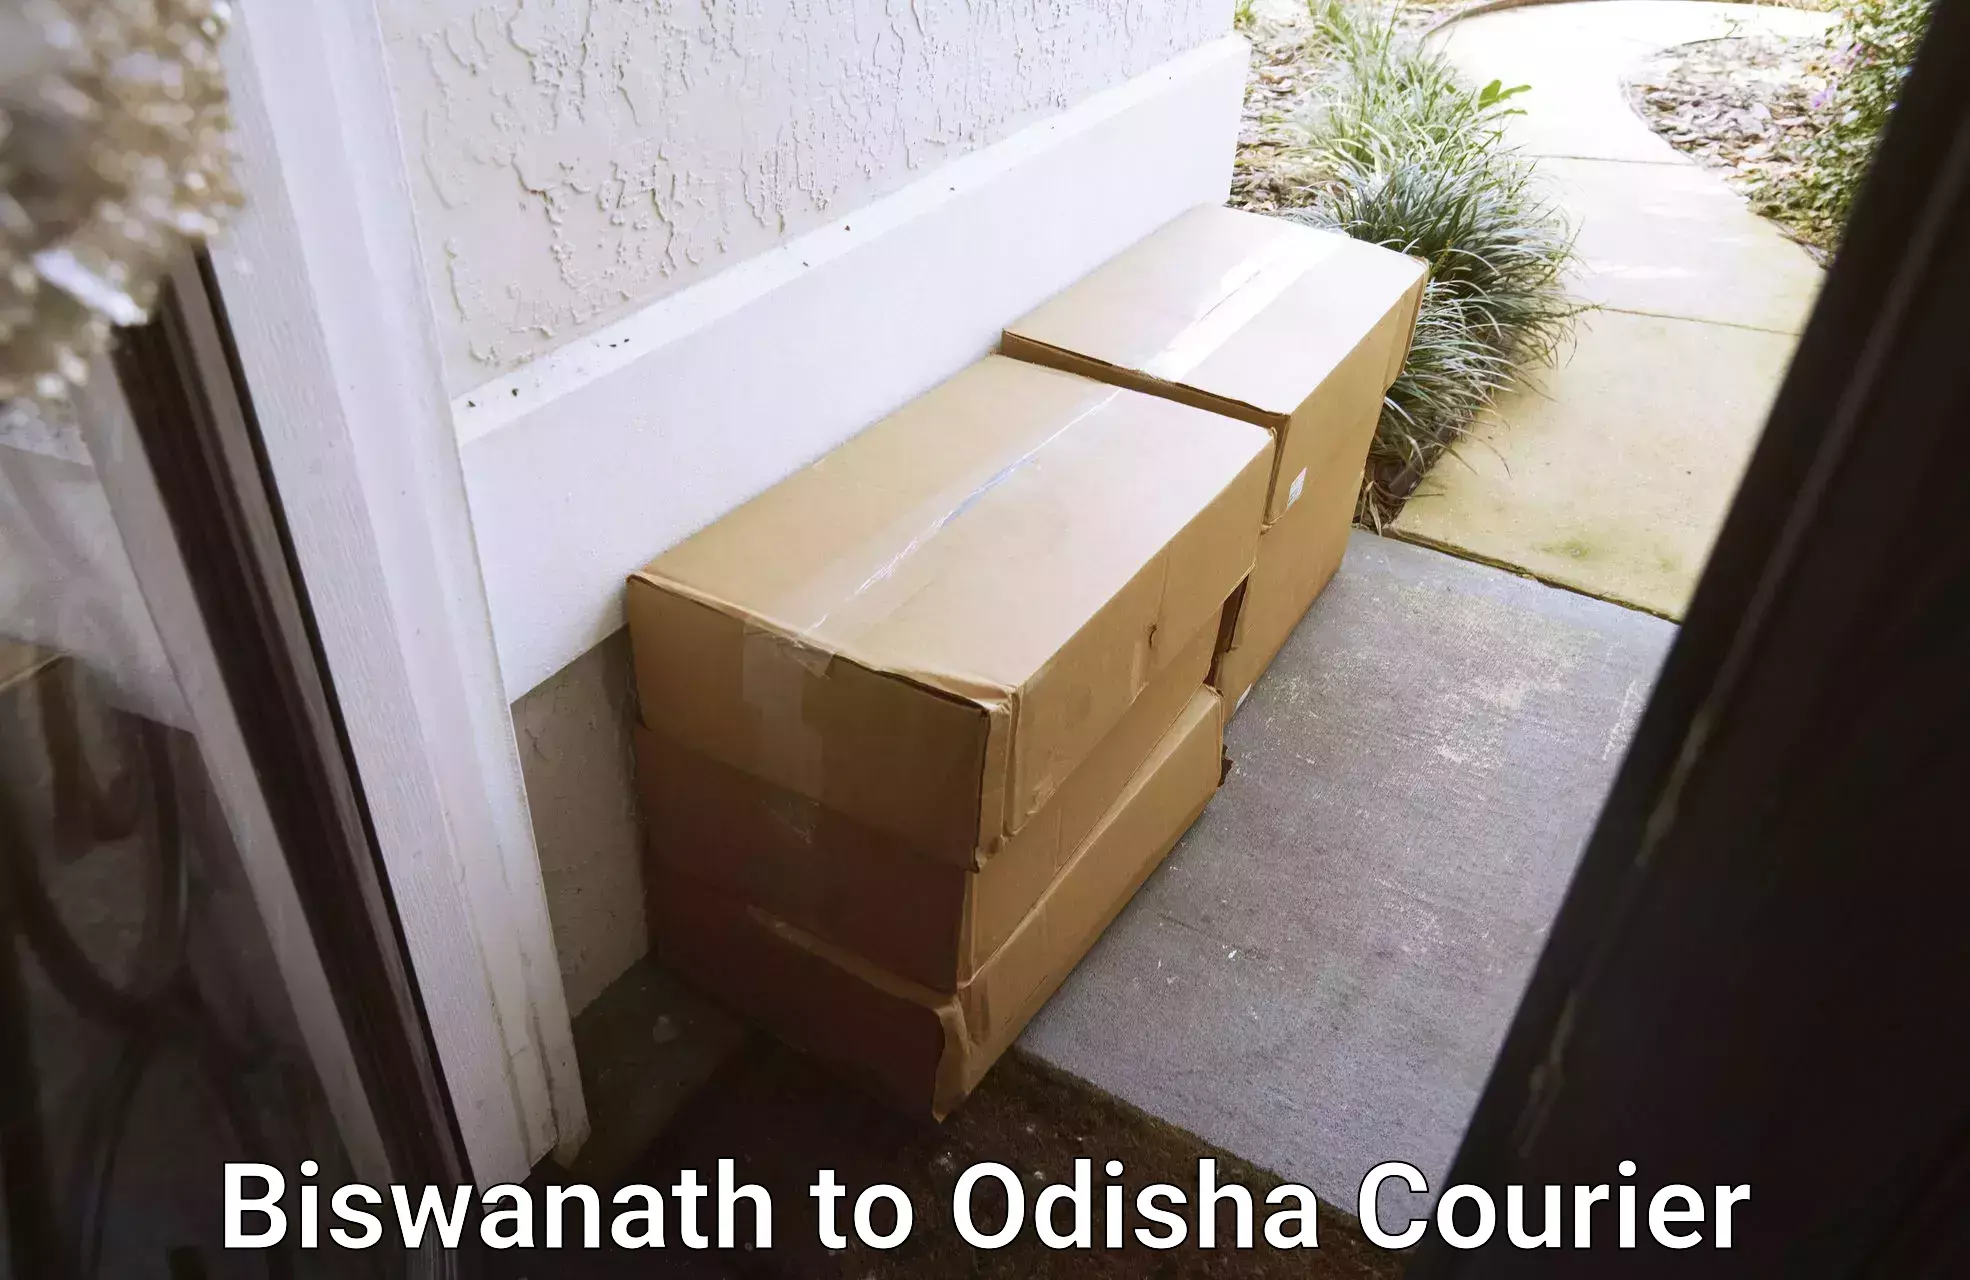 Reliable delivery network in Biswanath to Bahalda